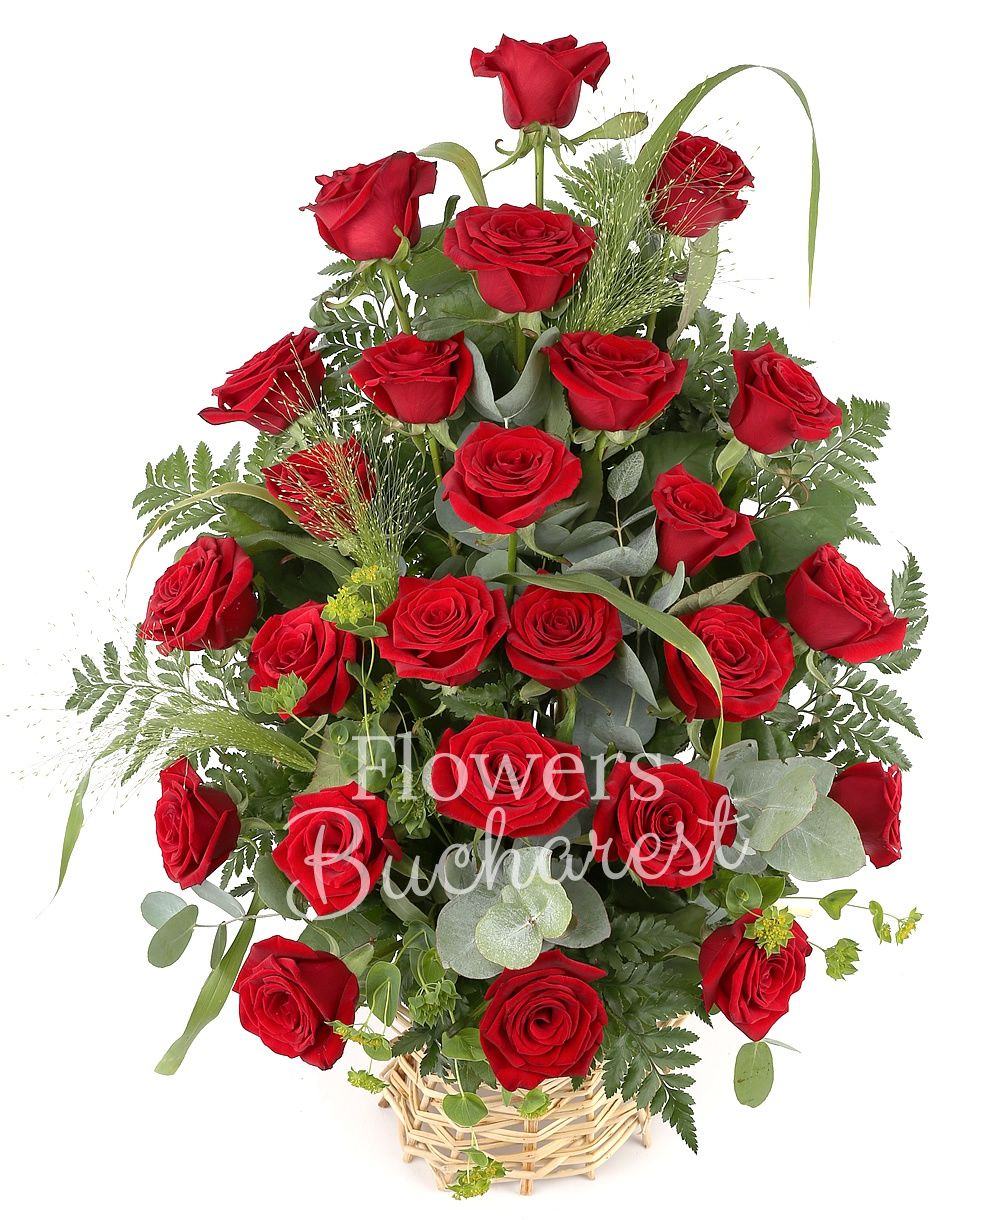 25 red roses, greenery